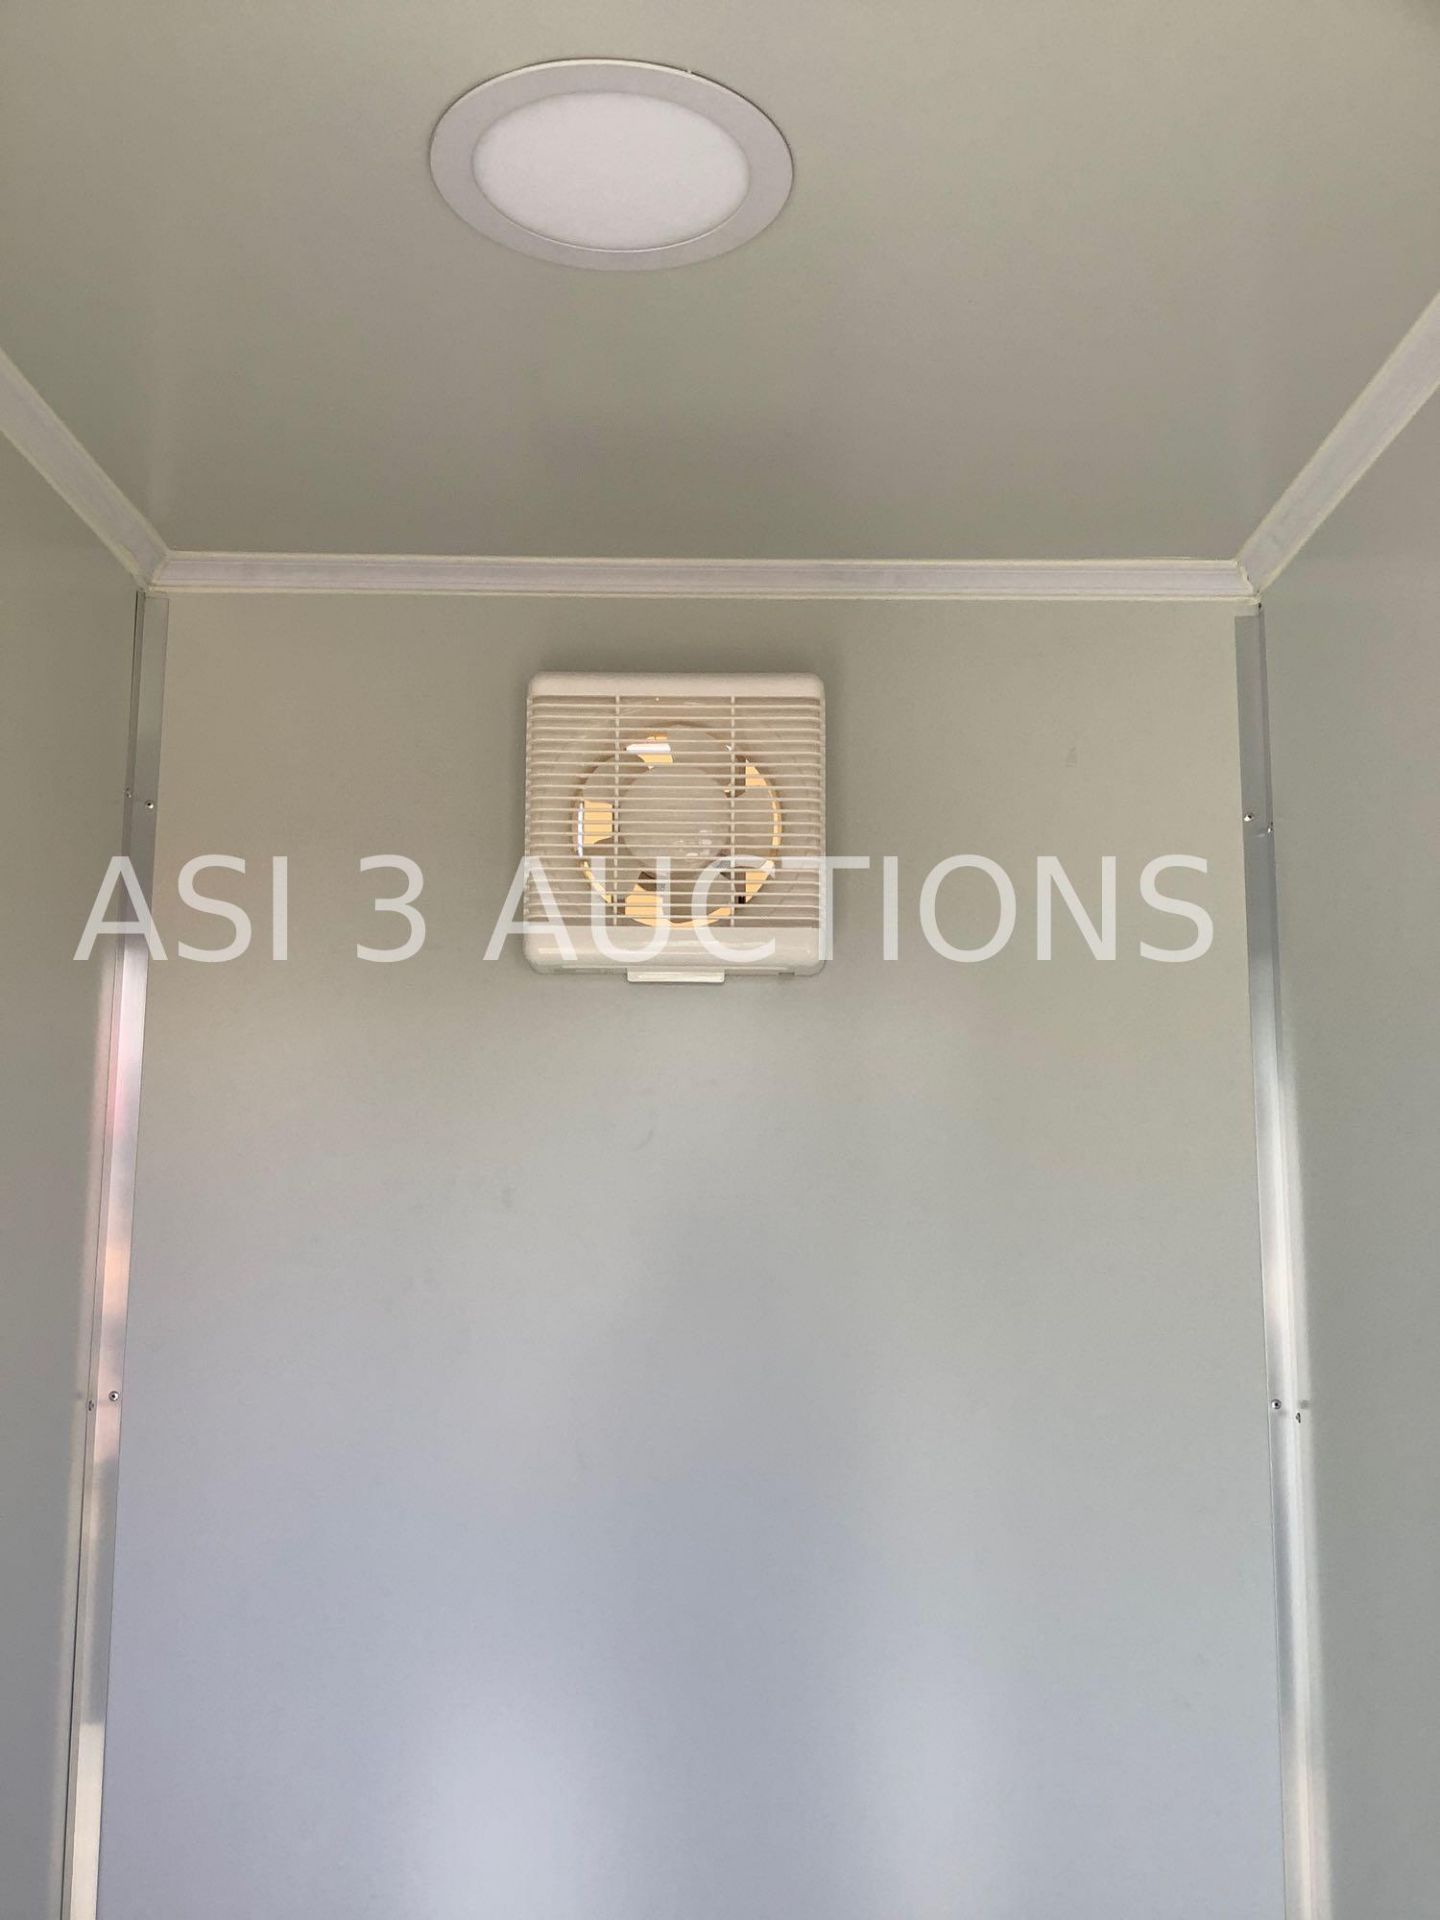 UNUSED PORTABLE MALE/FEMALE TOILETS, EXTERIOR PLUMBING CONNECTIONS, 110V/220V, EXHAUST FAN, LIGHTS - Image 9 of 14